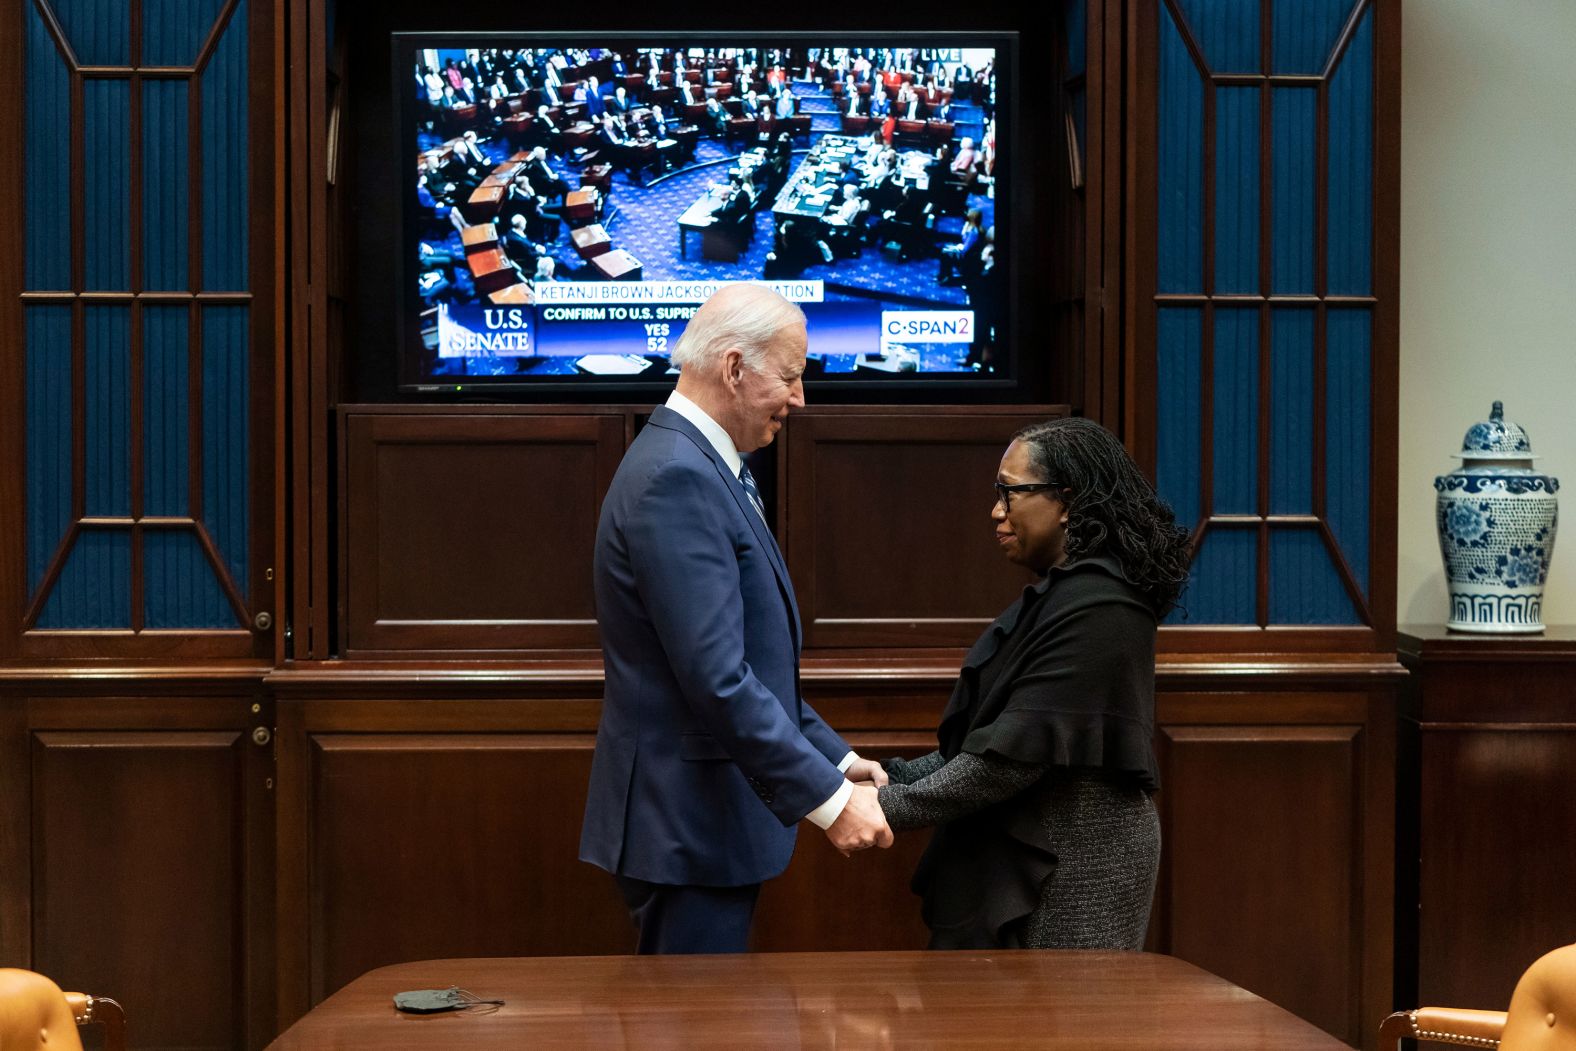 Biden holds hands with <a href="index.php?page=&url=https%3A%2F%2Fwww.cnn.com%2F2022%2F02%2F25%2Fpolitics%2Fgallery%2Fketanji-brown-jackson%2Findex.html" target="_blank">Ketanji Brown Jackson</a> as the Senate votes on her nomination to the US Supreme Court in April 2022. Jackson was confirmed and made history as <a href="index.php?page=&url=https%3A%2F%2Fwww.cnn.com%2F2022%2F06%2F30%2Fpolitics%2Fwho-is-justice-ketanji-brown-jackson%2Findex.html" target="_blank">the first Black woman on the court</a>.